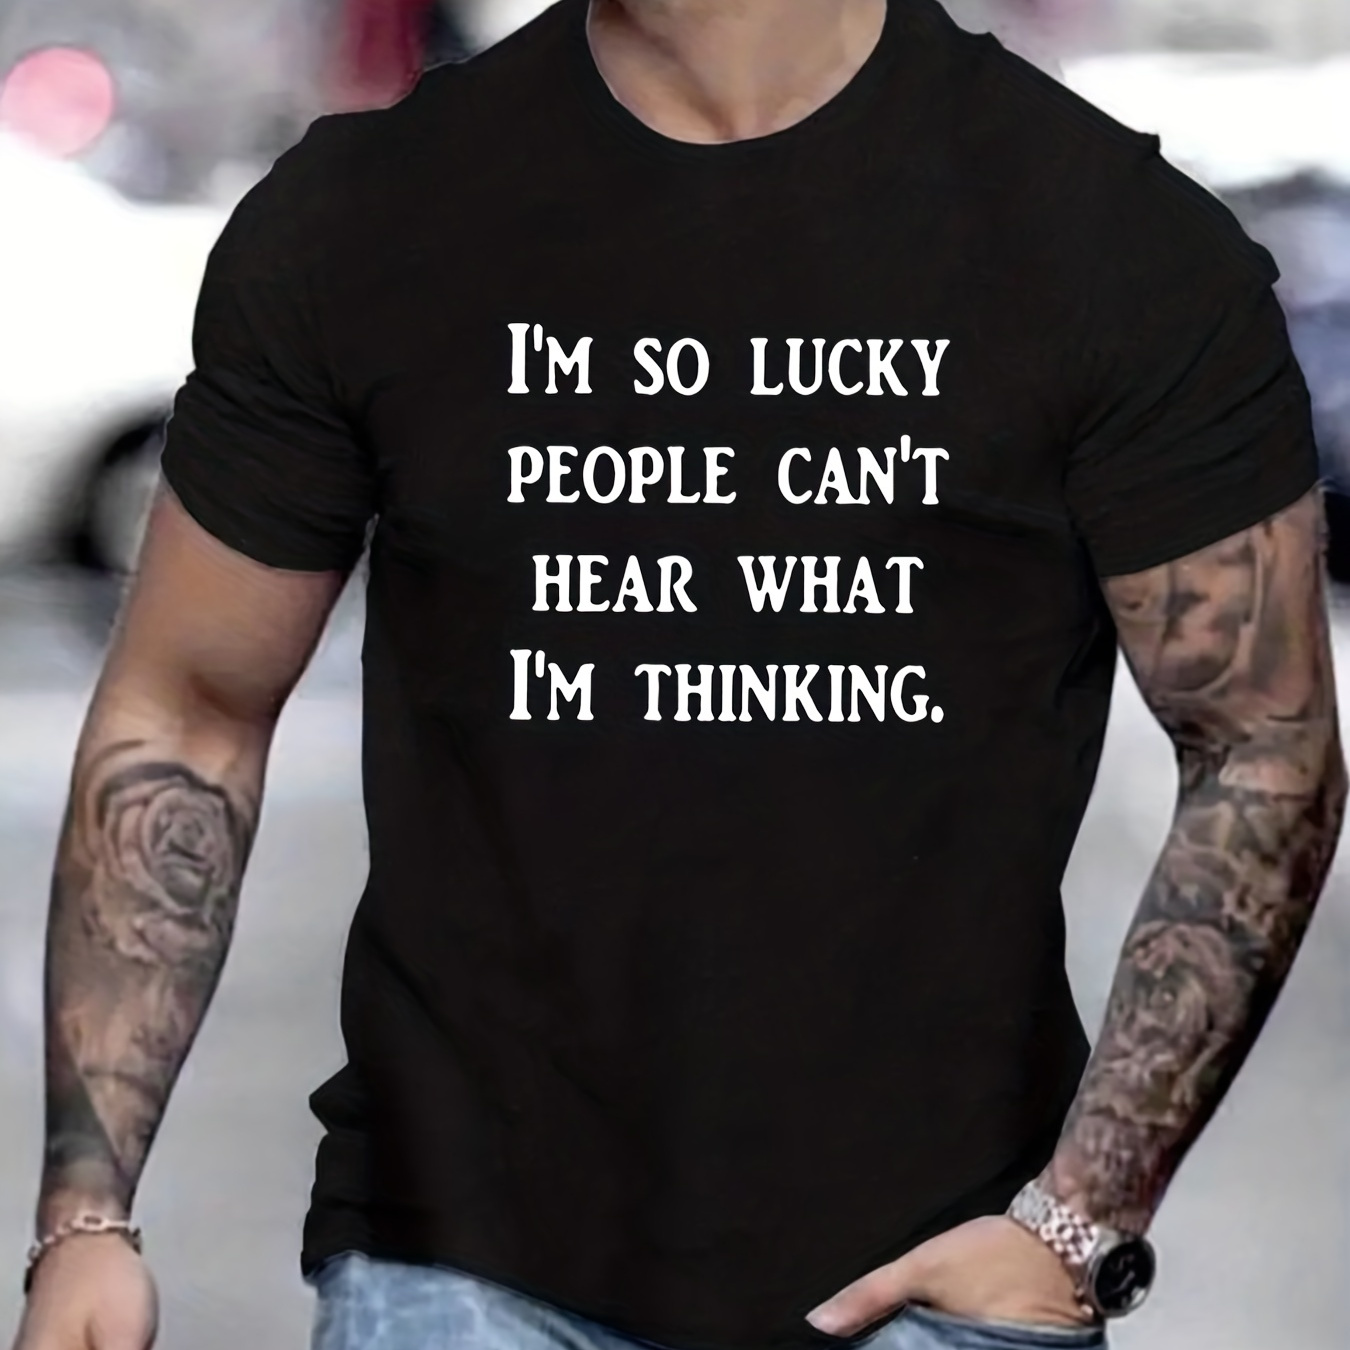 

Tees For Men, Funny 'lucky Me' Print T Shirt, Casual Short Sleeve Tshirt For Summer Spring Fall, Tops As Gifts